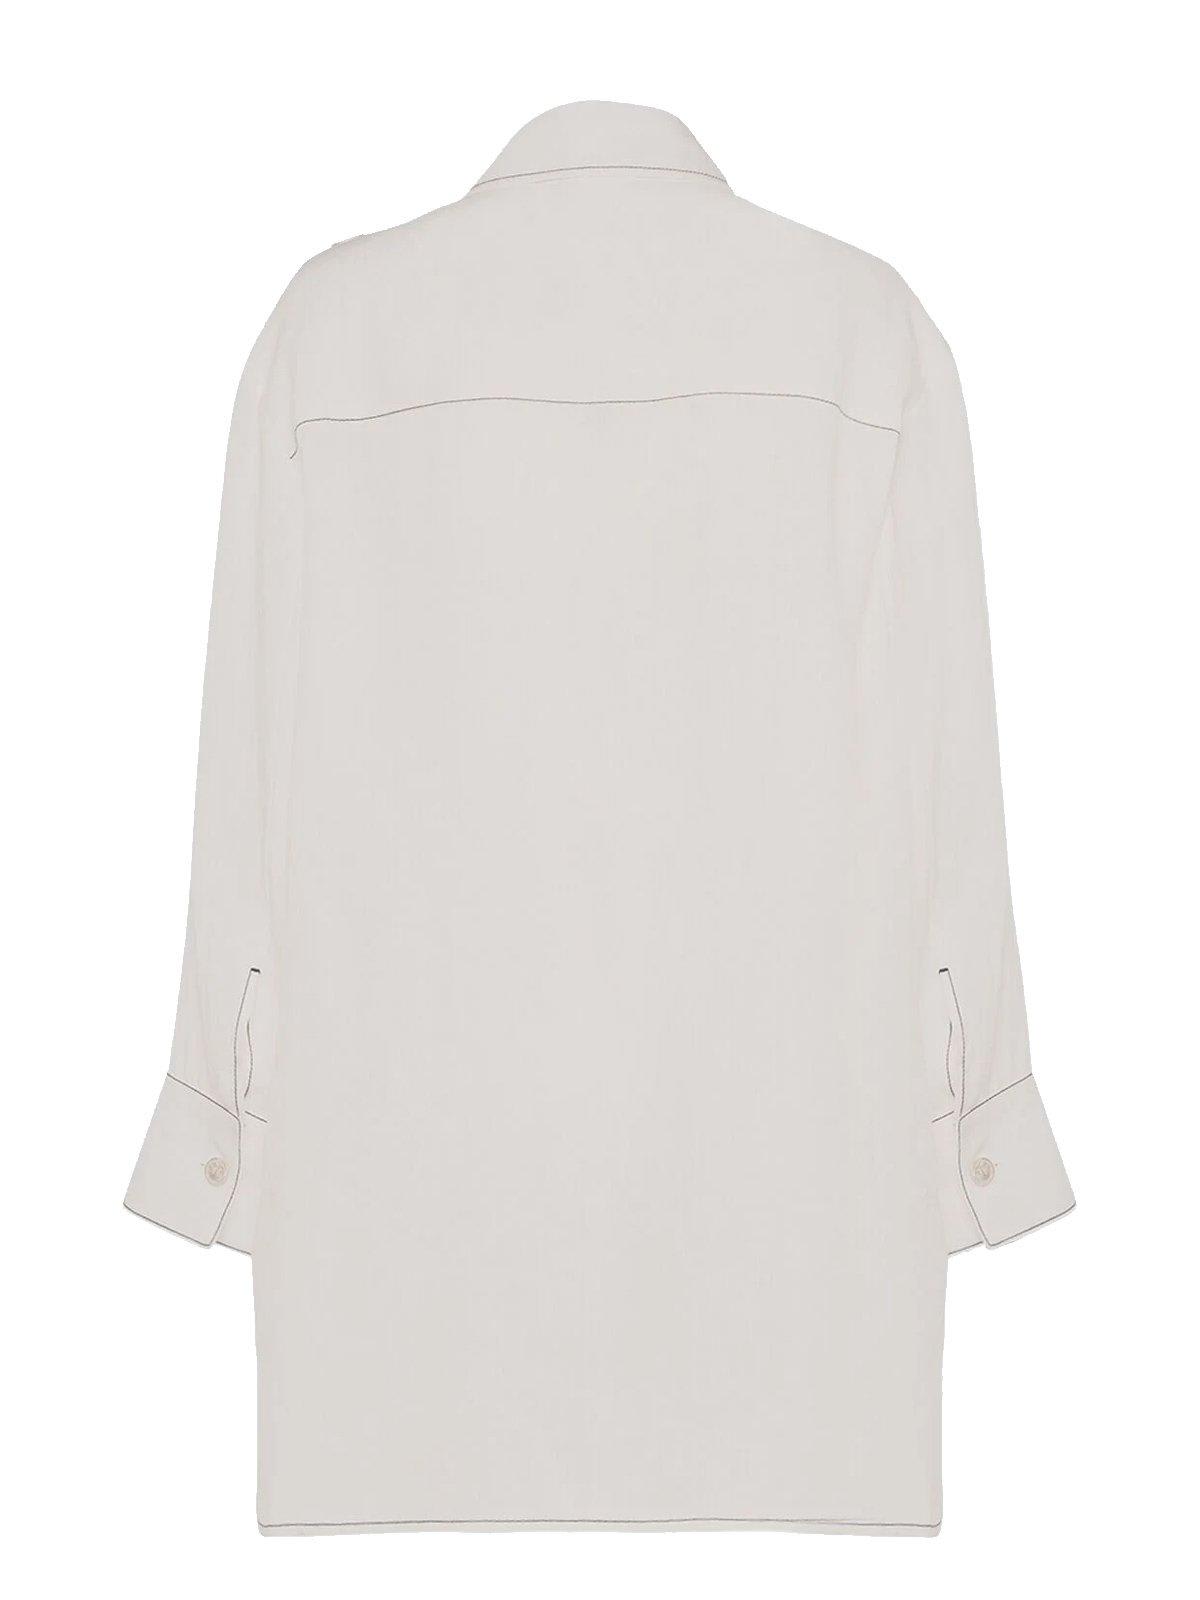 Shop 's Max Mara Buttoned Long-sleeved Top S Max Mara In White